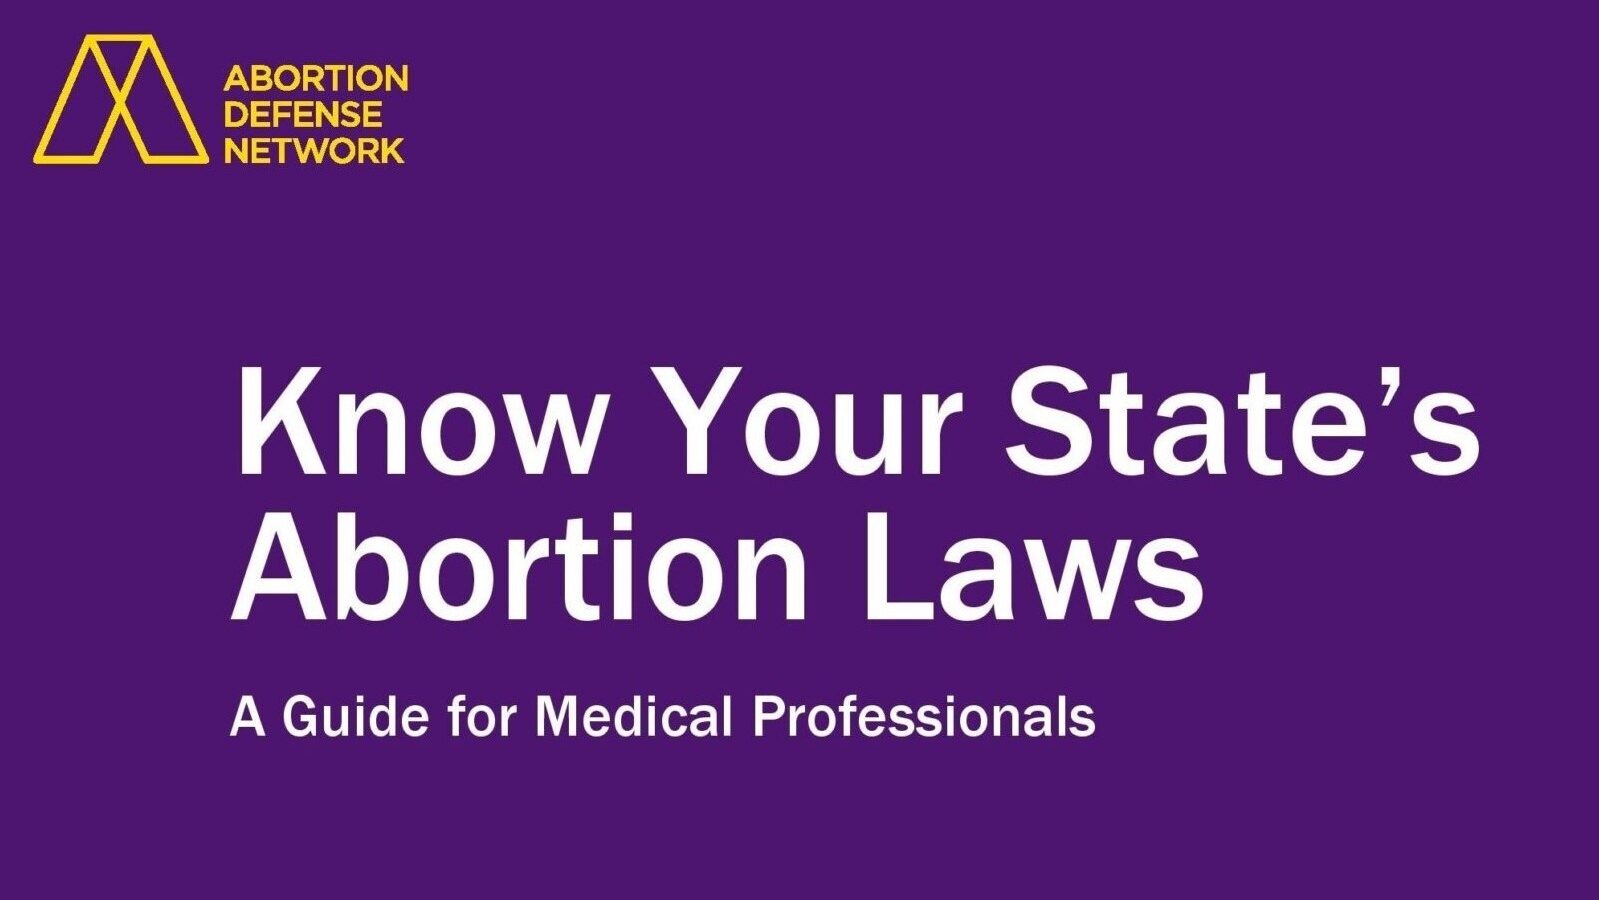 Know-Your-States-Abortion-Laws-cover-no-stripe-aspect-ratio-16-9